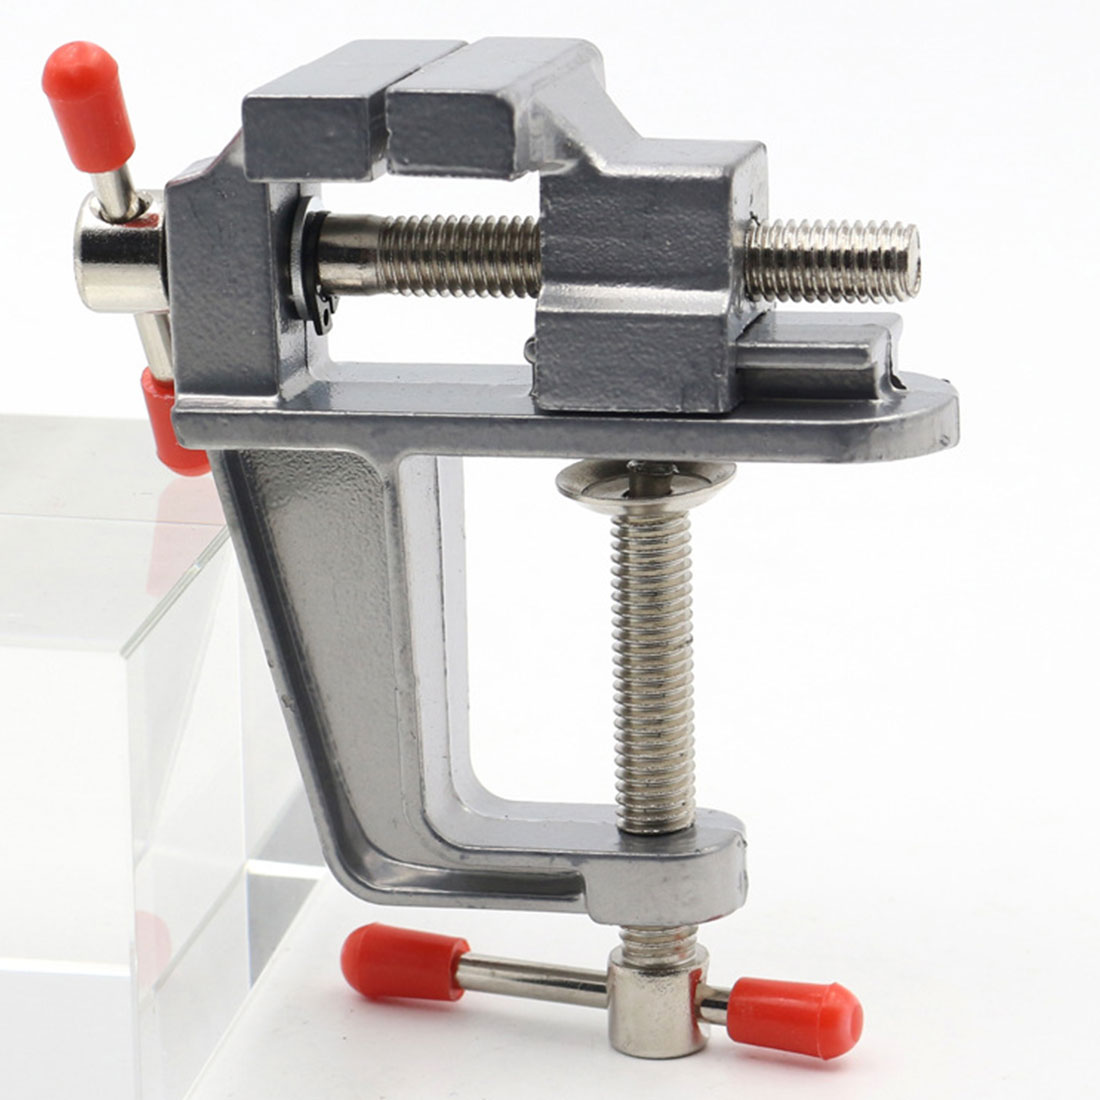 3.5" Aluminum Miniature Small Jewelers Hobby Clamp Table Bench Vise Tool Vice 